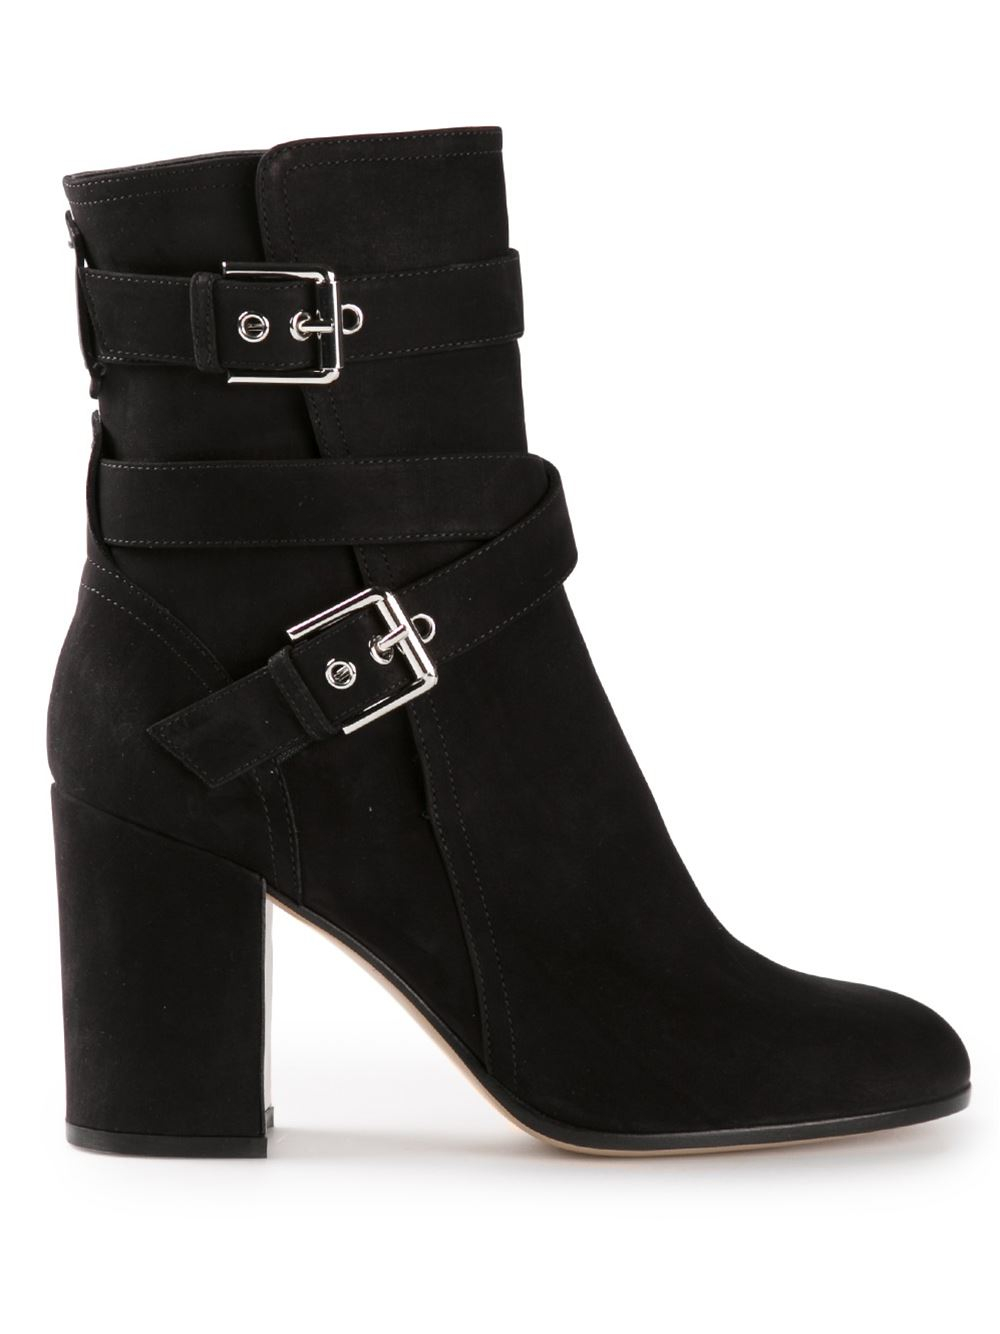 Lyst - Gianvito Rossi Ankle Boots in Black